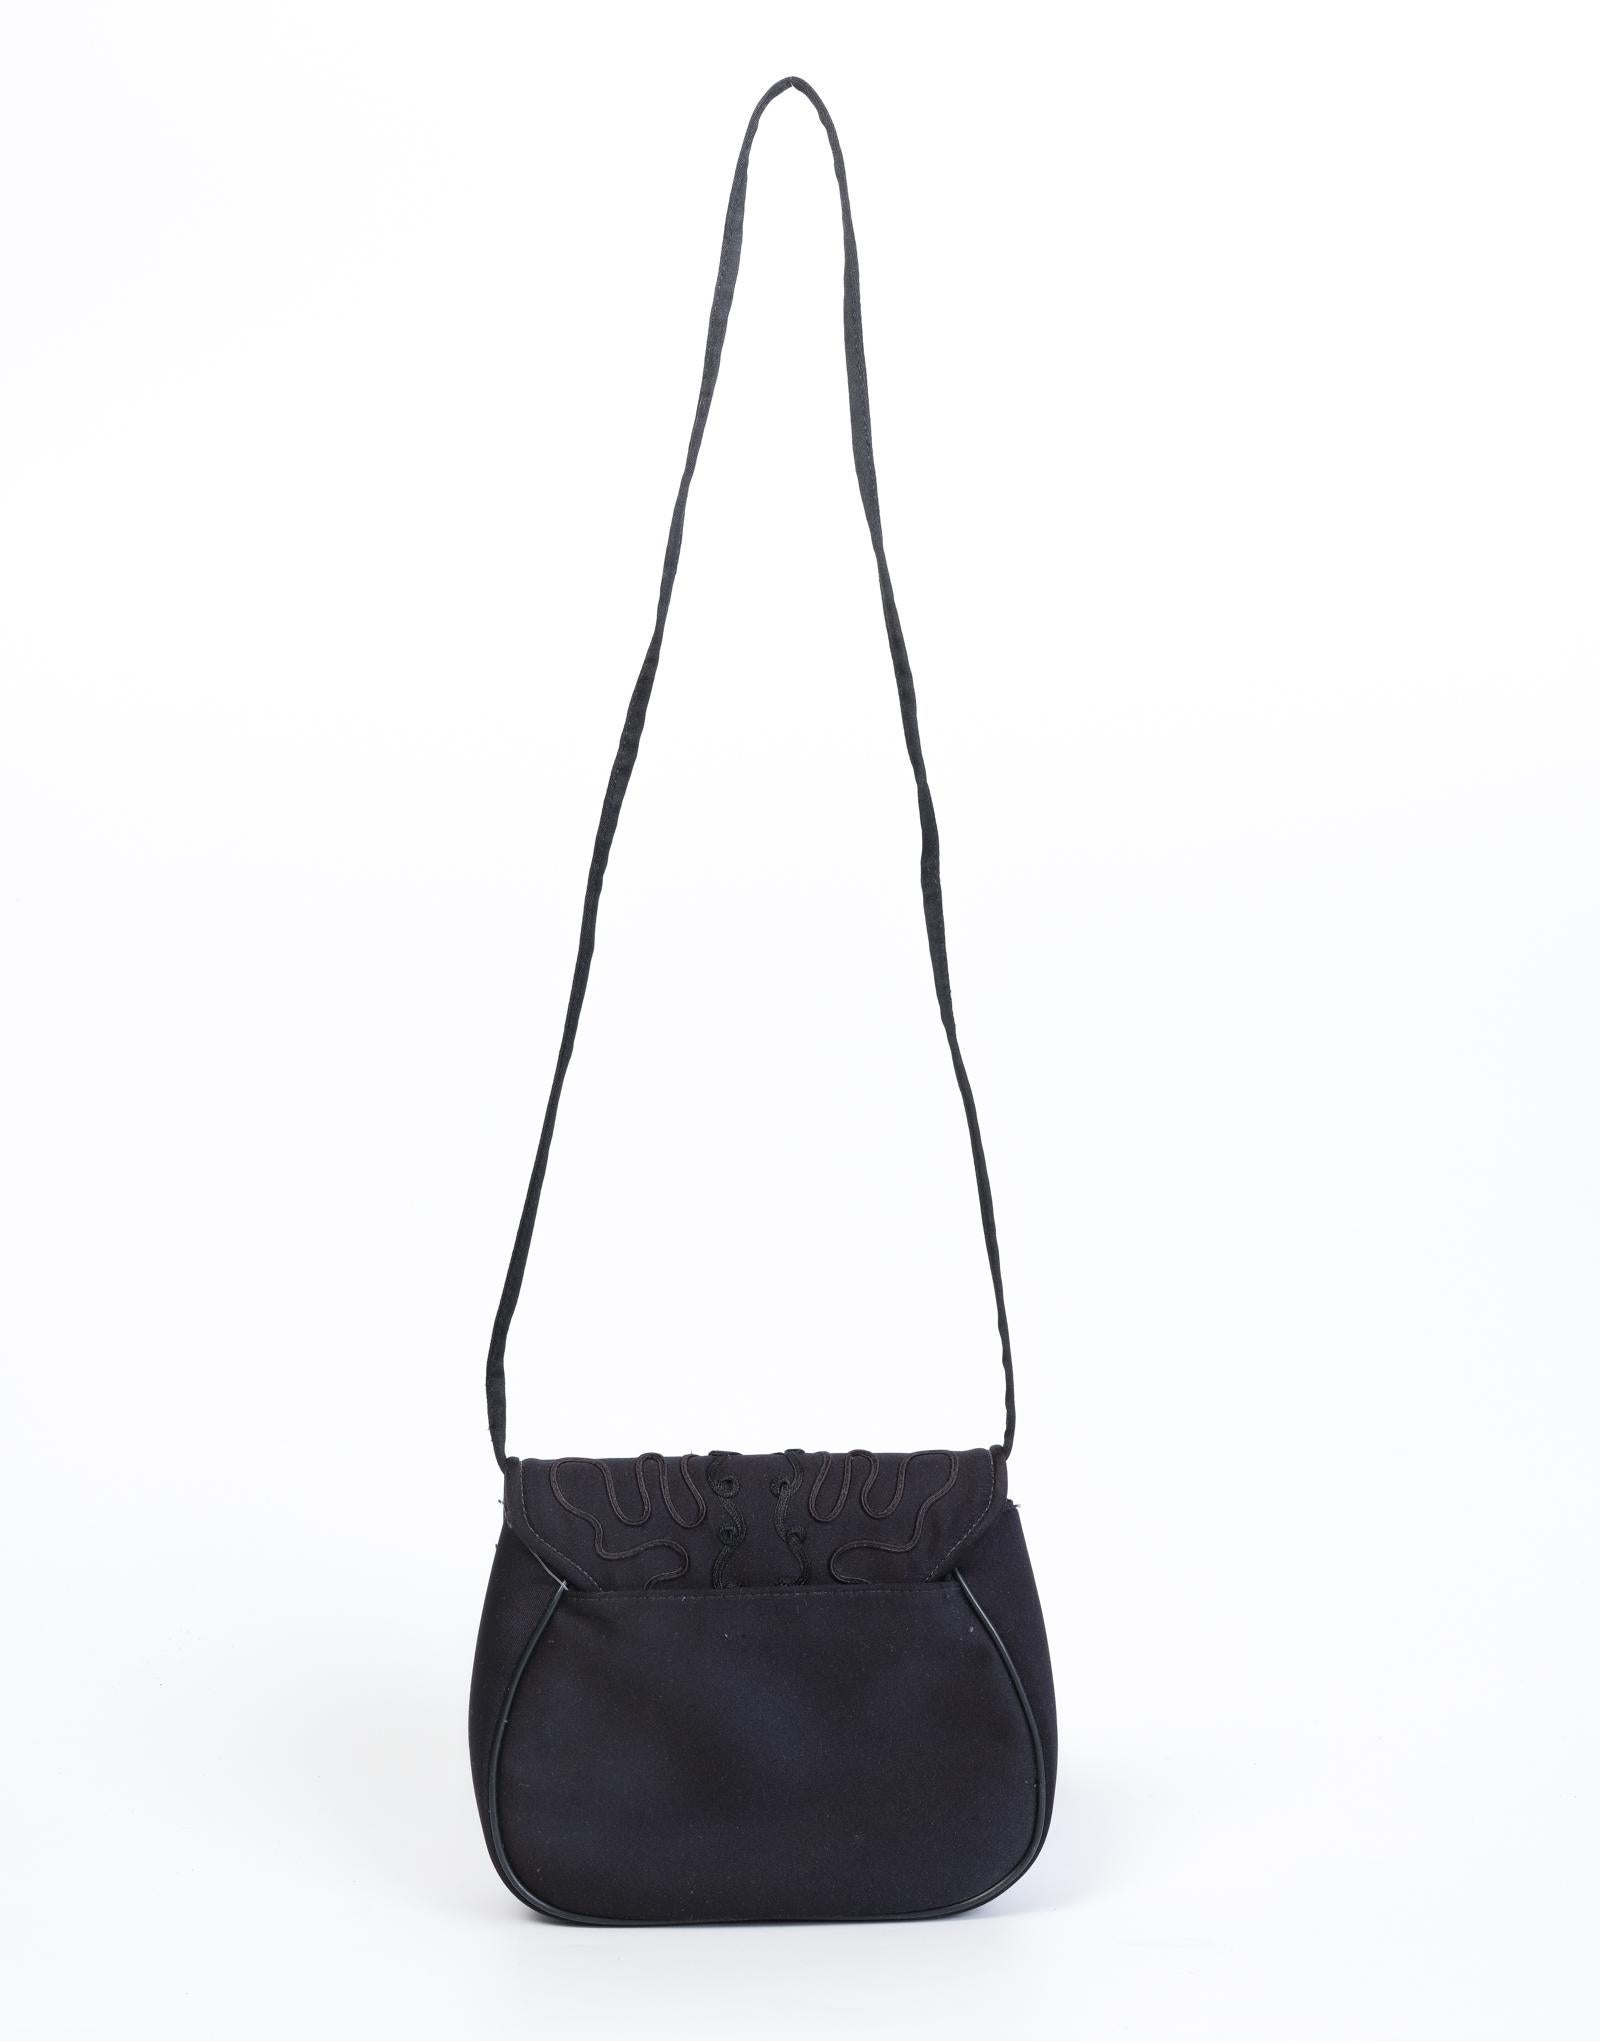 This vintage Givenchy bag is made with black satin and features ornate embroidery on the front flap and a long fabric strap for crossbody carry. A classic and sophisticated style.

COLOR: Black
MATERIAL: SATIN
CONDITION: The exterior shows marks on